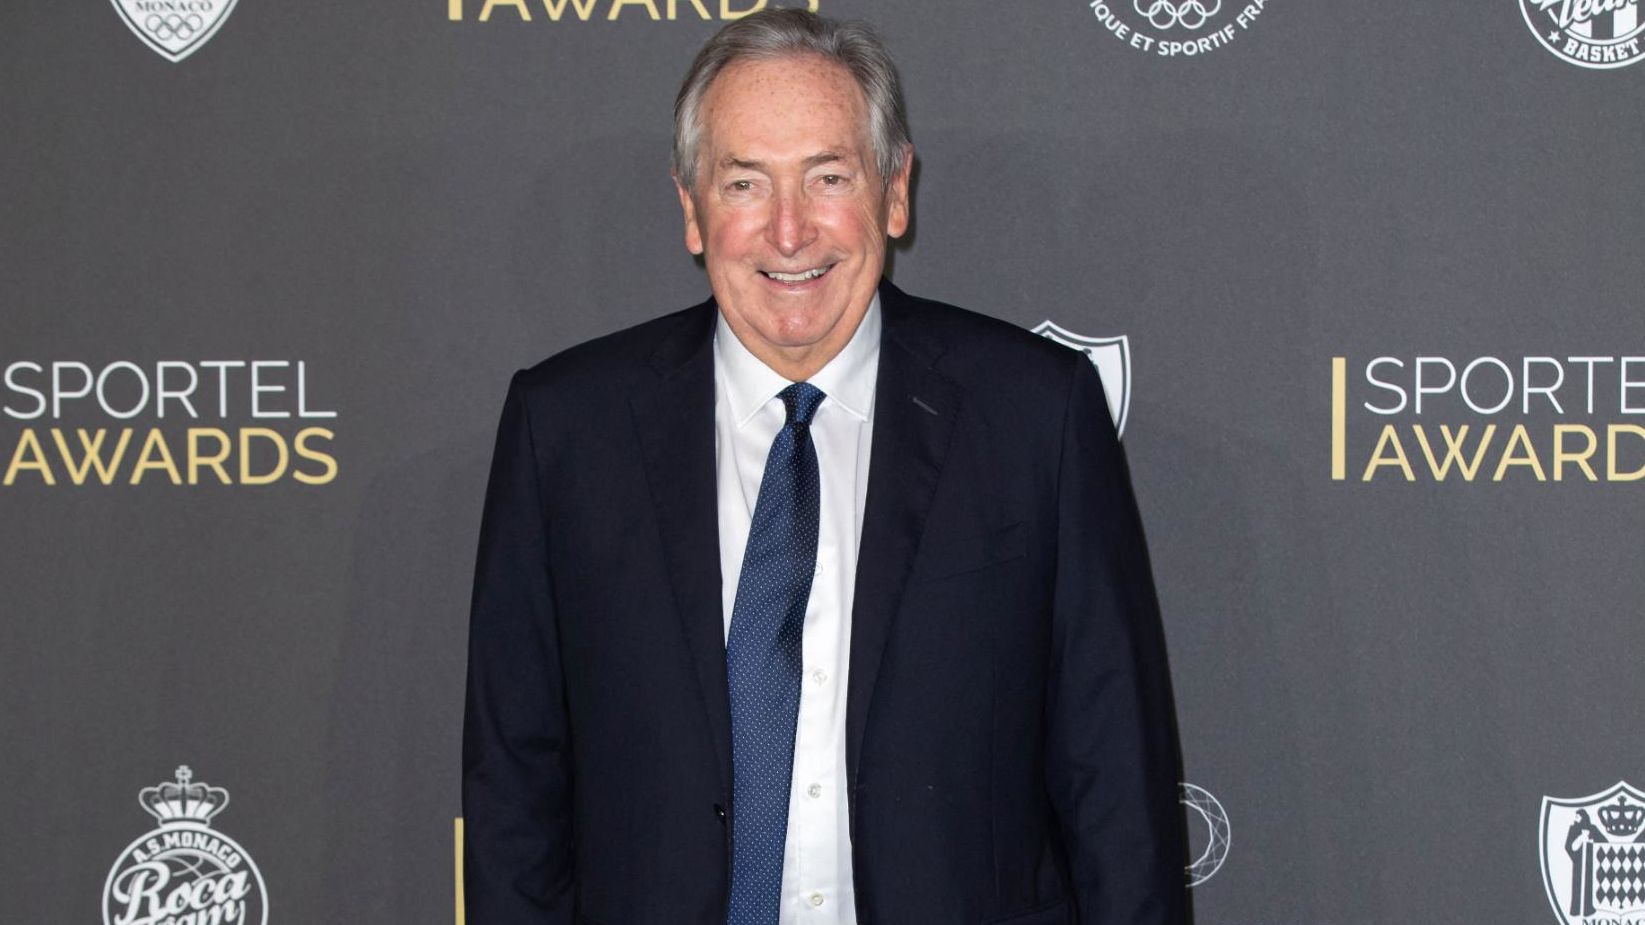 Houllier attends the Sportel Awards Gala held at the Grimaldi Forum on October 27, 2020 in Monaco.